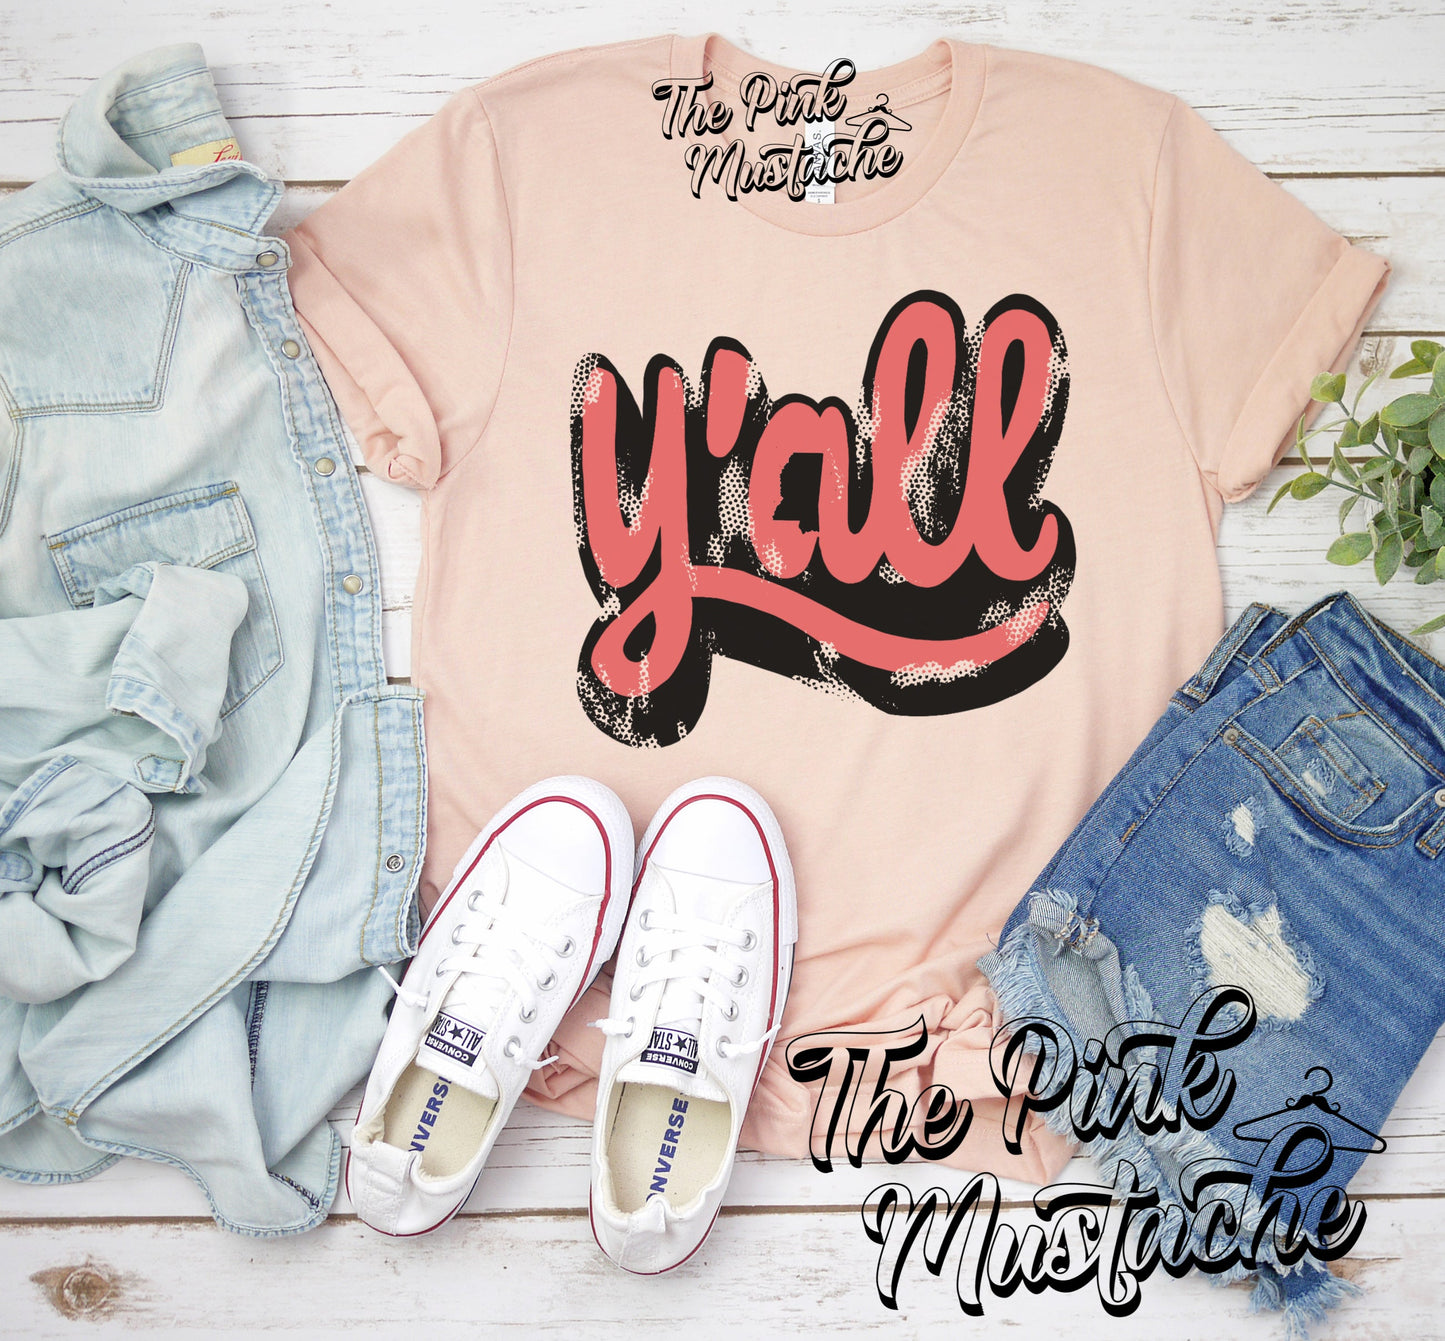 Y'all Any State -  Mississippi Shirt - Softstyle Peach Tees /Every State Available/ Southern Style Shirt